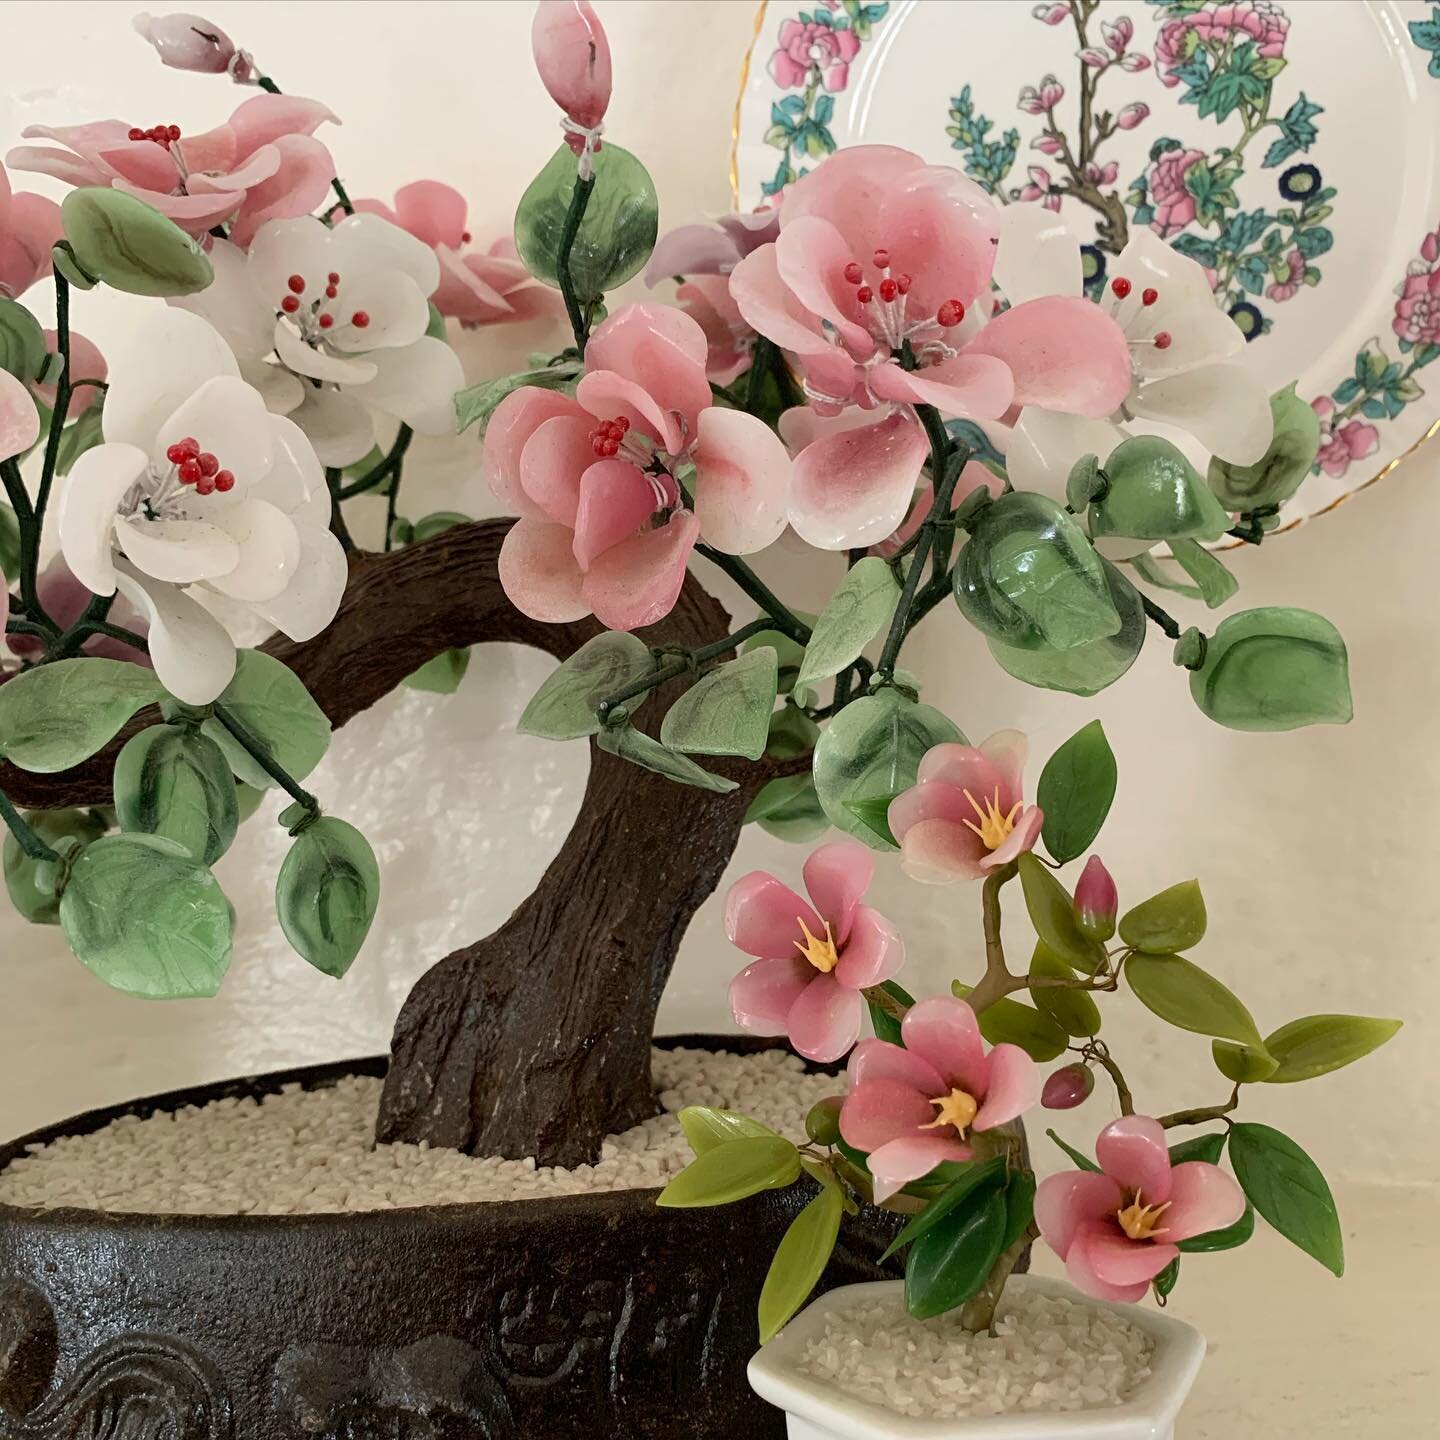 Love these #vintage jade and glass #chinoiserie trees🌸🌿 #thrifted #thrifting #thriftstorefinds #thriftshopping #thriftshopper #thriftshopfinds thriftshop #vintagestyle #chinoiseriechic #chinoiseriestyle #thriftstyle #thriftscout #thriftfabulous #pa